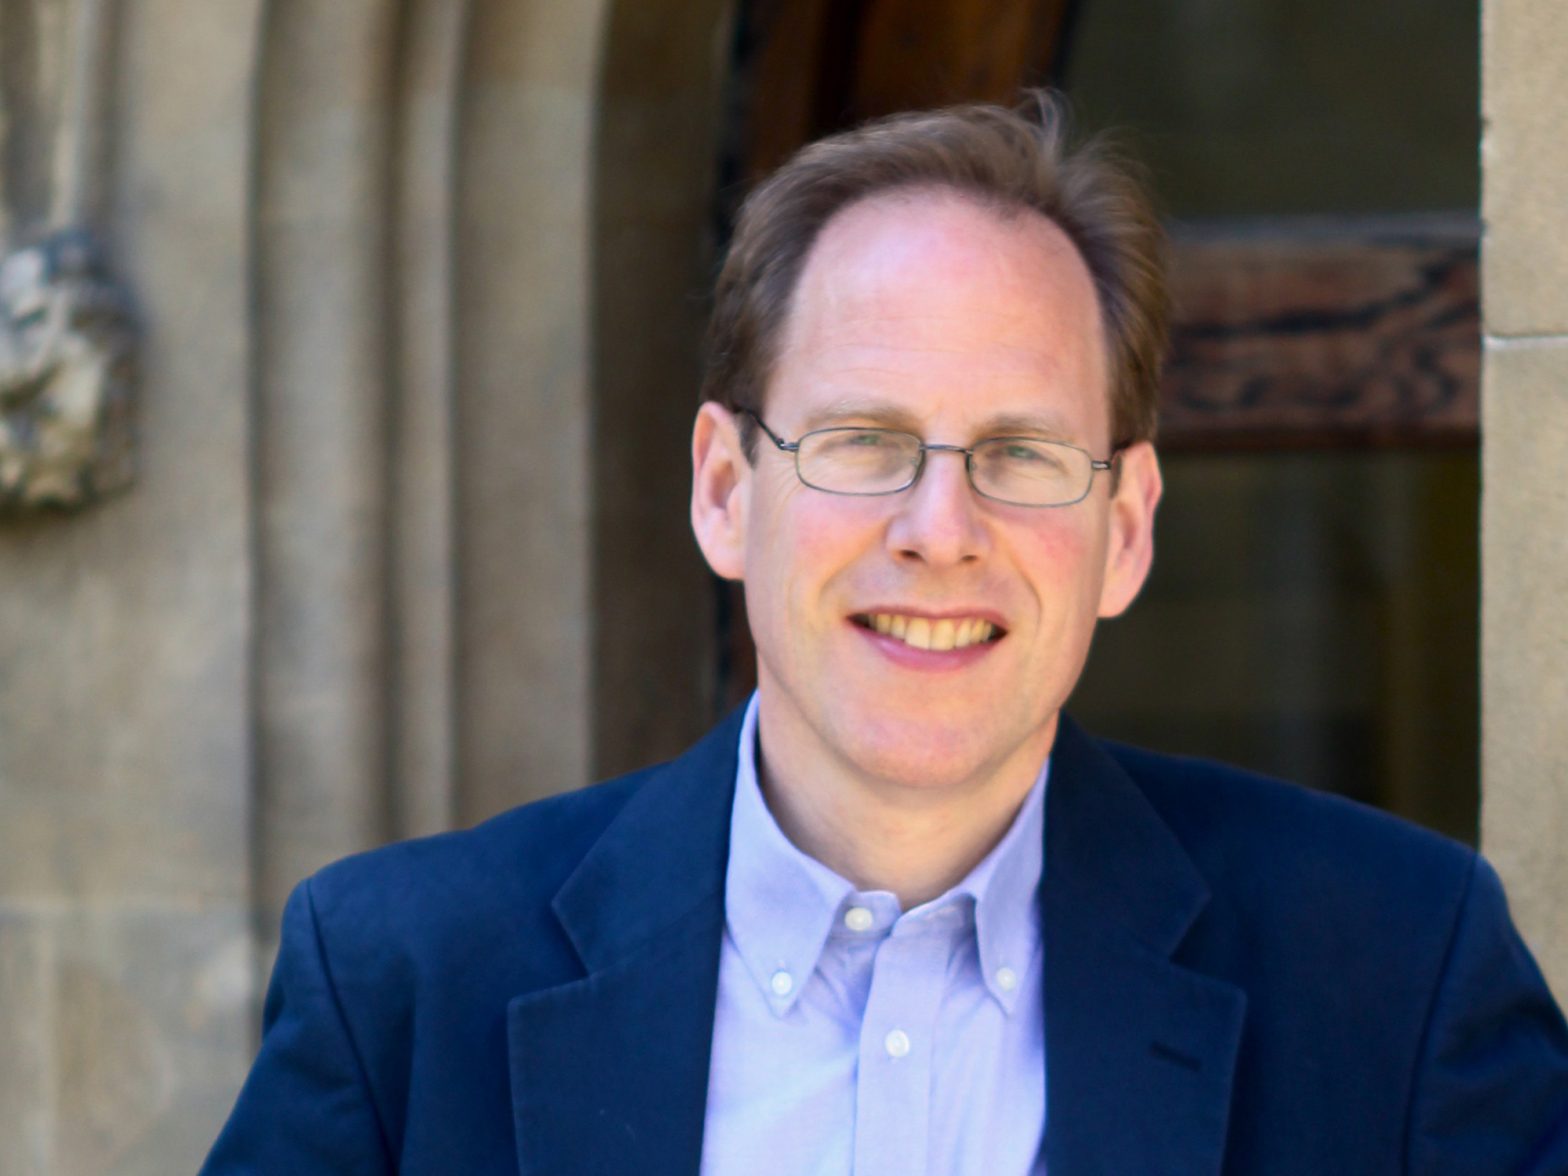 Sir Simon Baron-Cohen, FBA FBPsS FMedSci, Professor of Developmental Psychopathology at Cambridge, Director of the Autism Research Centre, and Fellow of Trinity